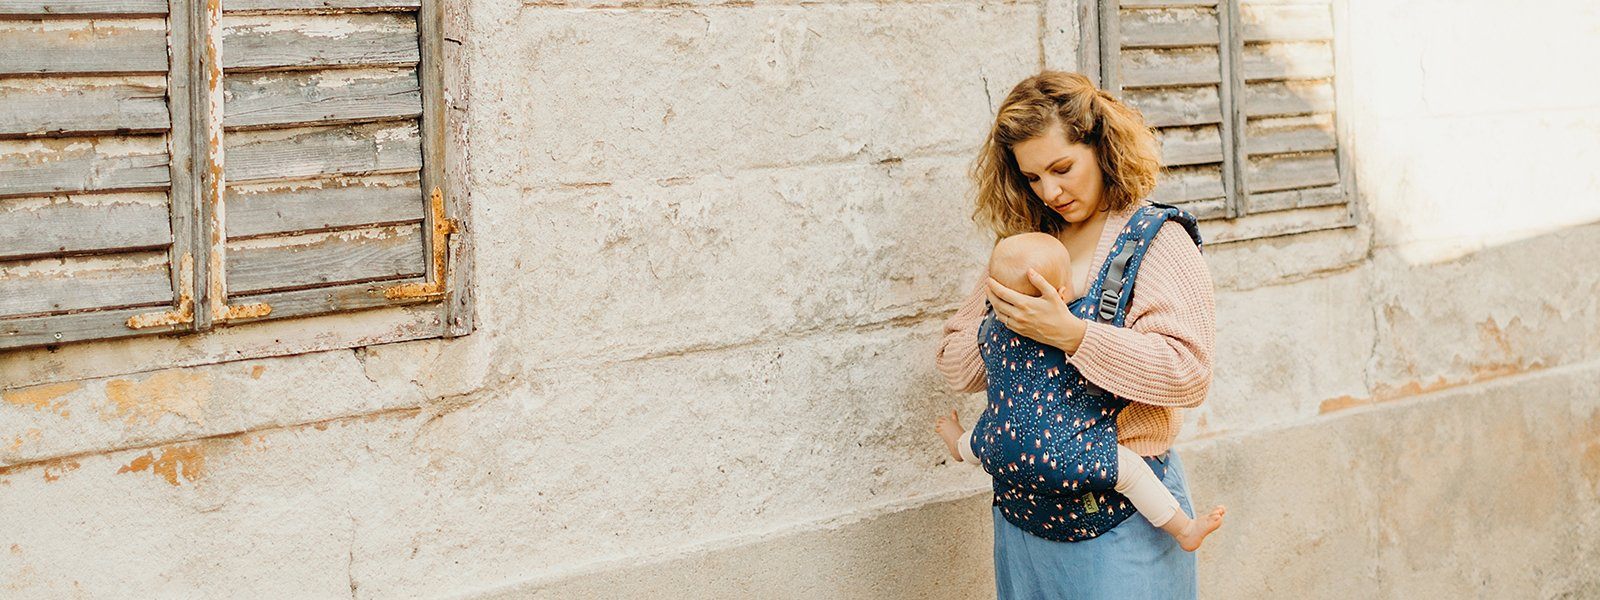 Slow Bone Loss During Breastfeeding: CARRY your baby(ies)!